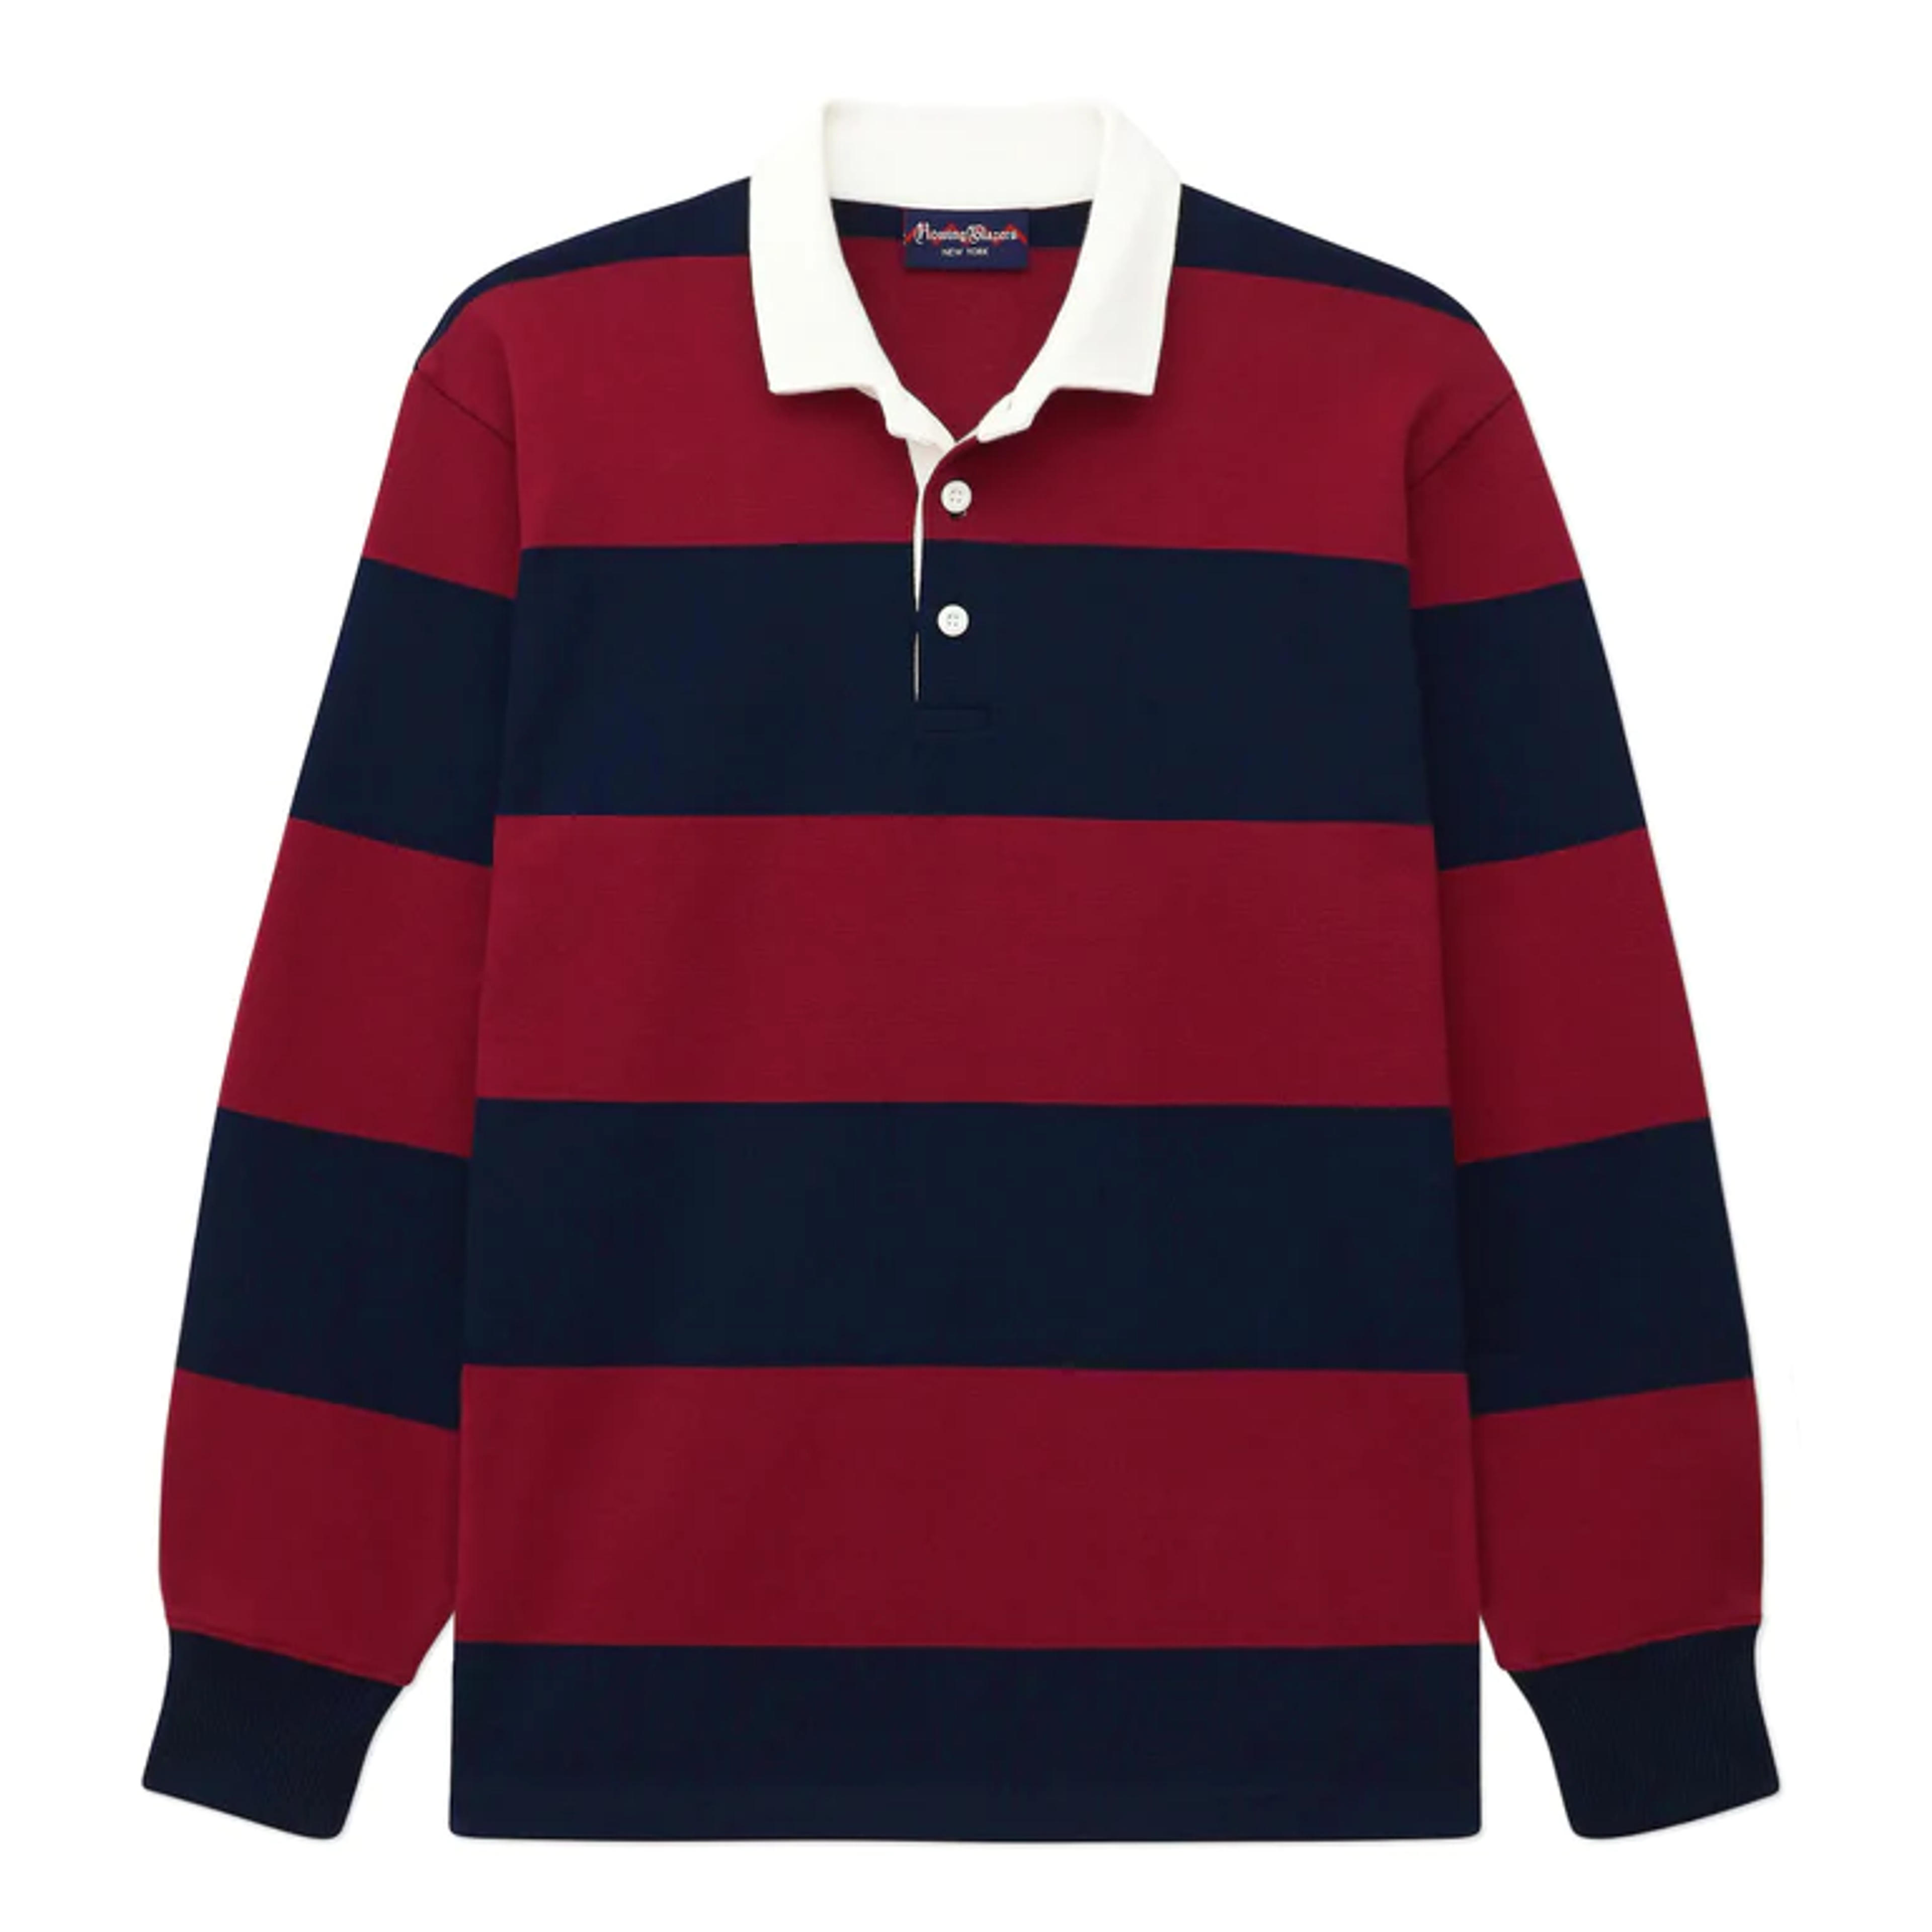 Jagger Stripe Rugby – Rowing Blazers